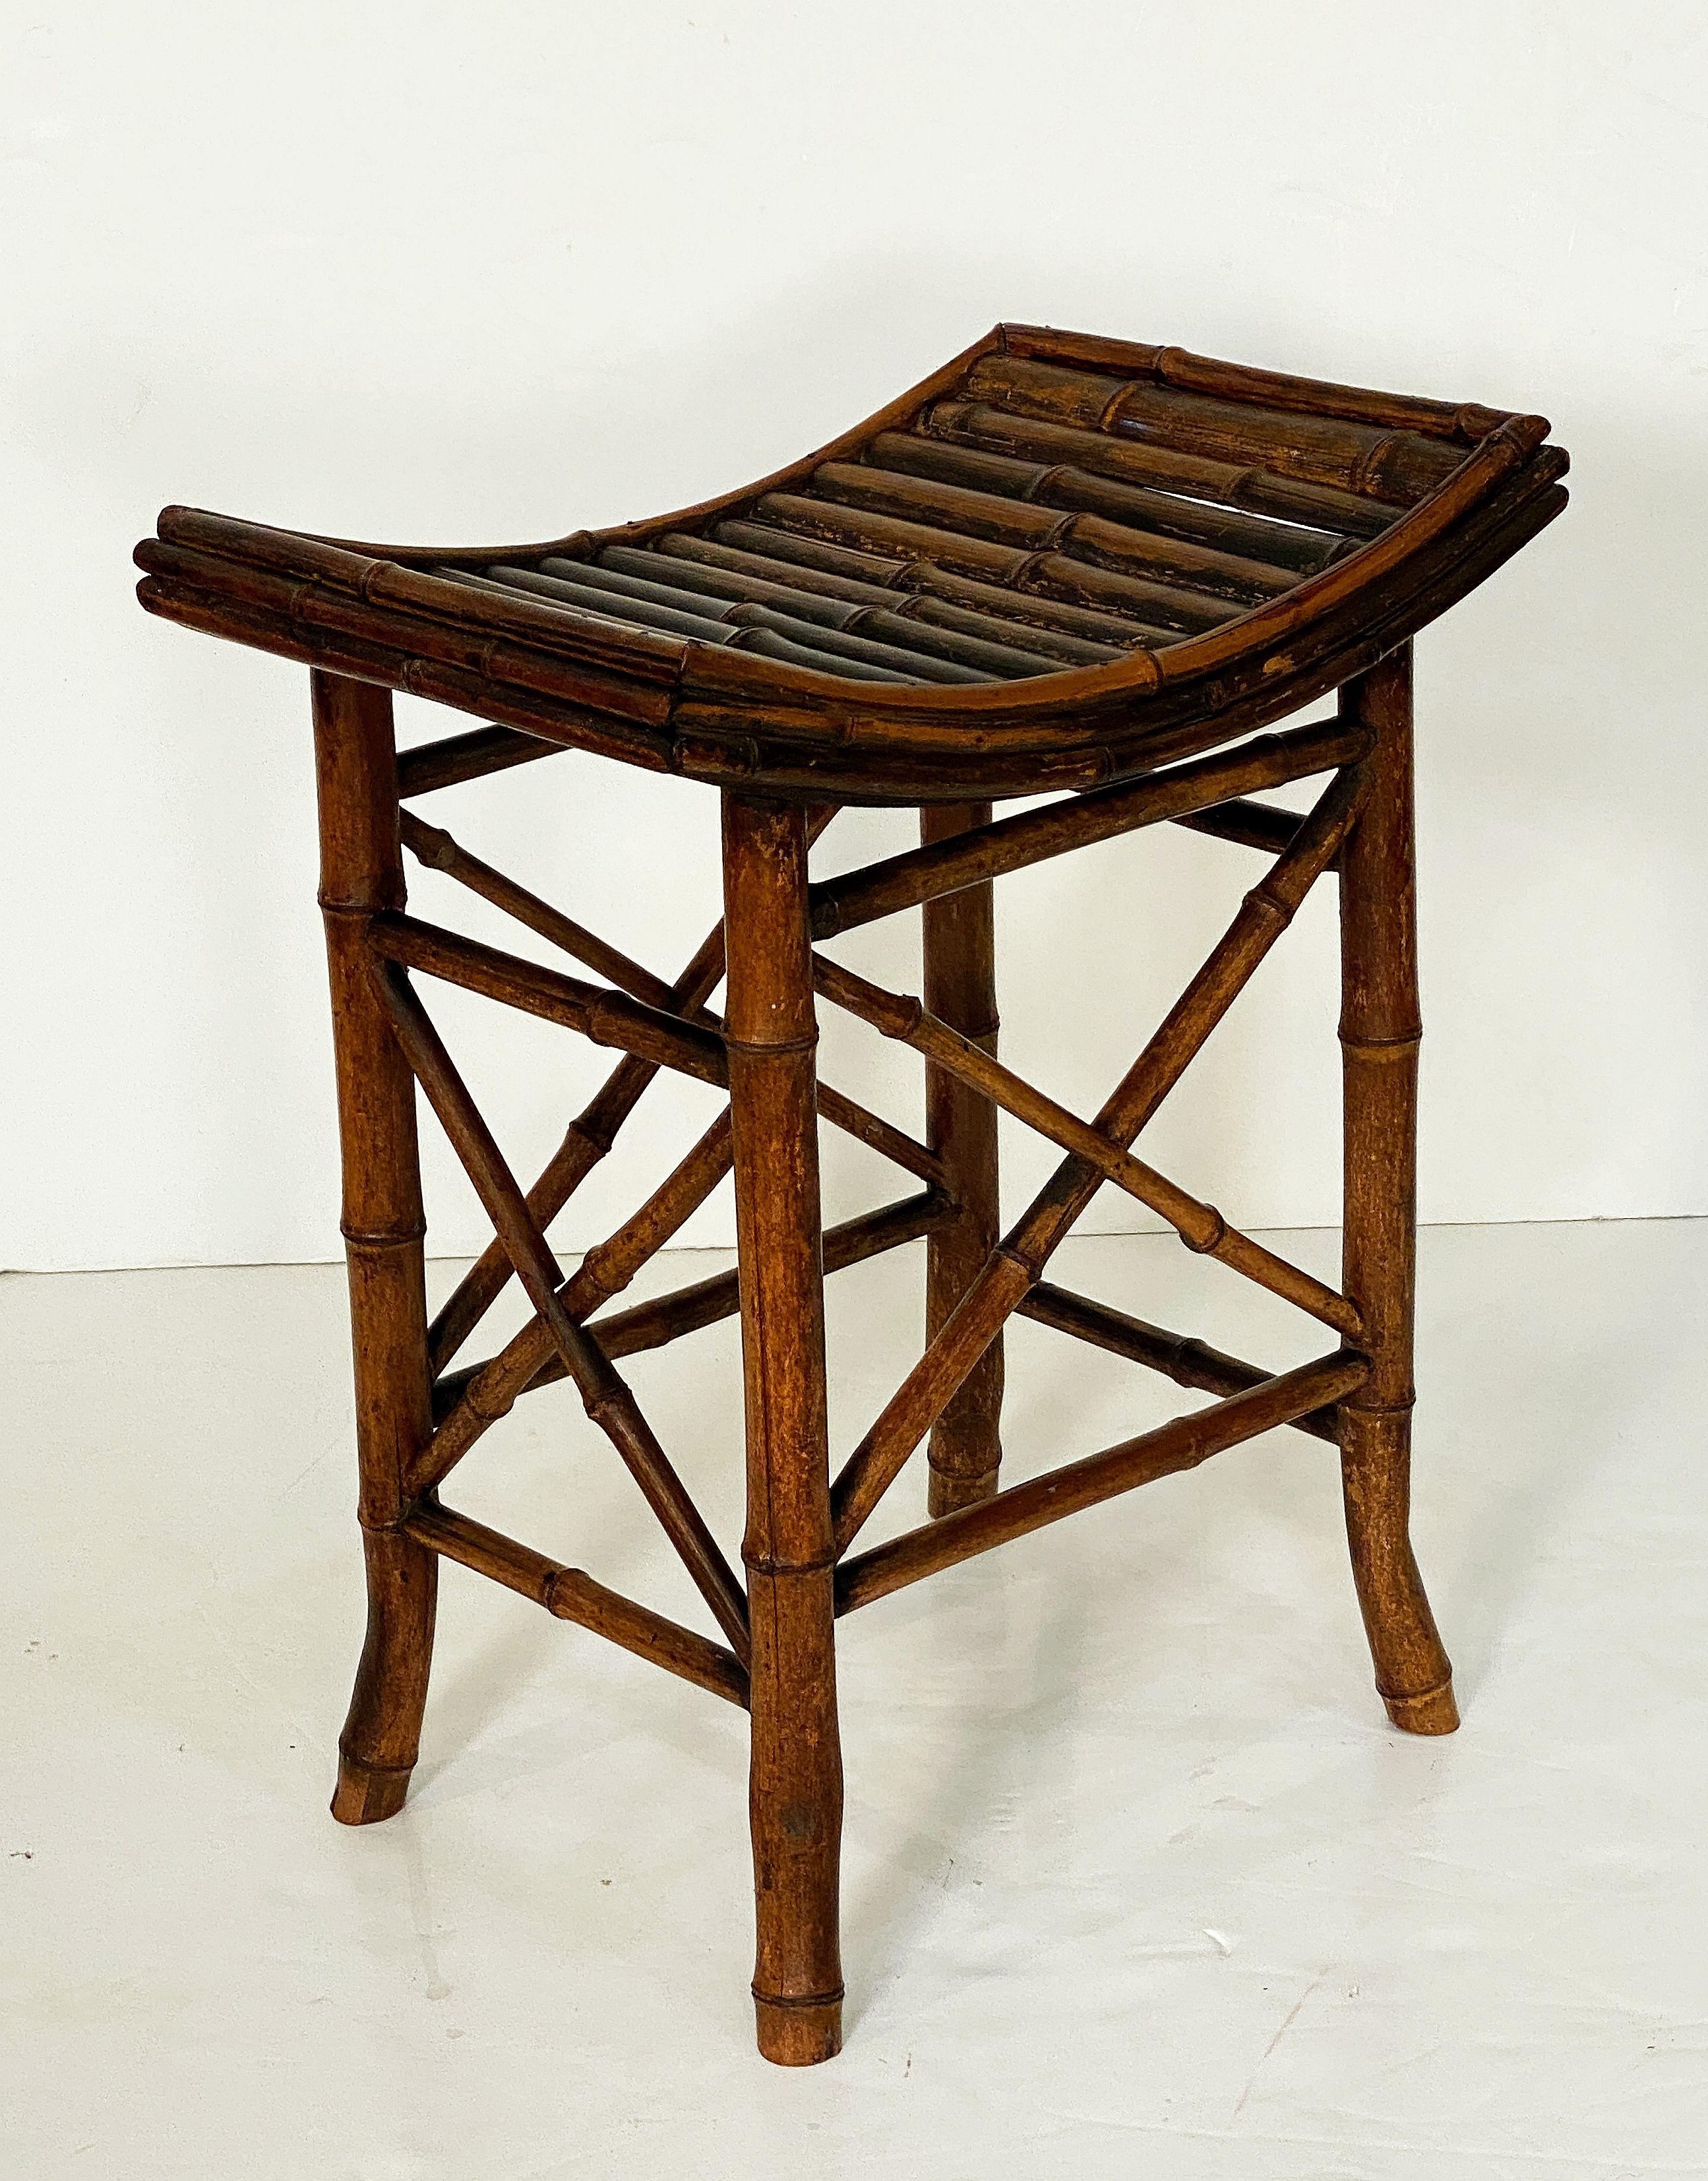 English Bamboo Bench or Stool with Saddle Seat from the Aesthetic Movement Era For Sale 10